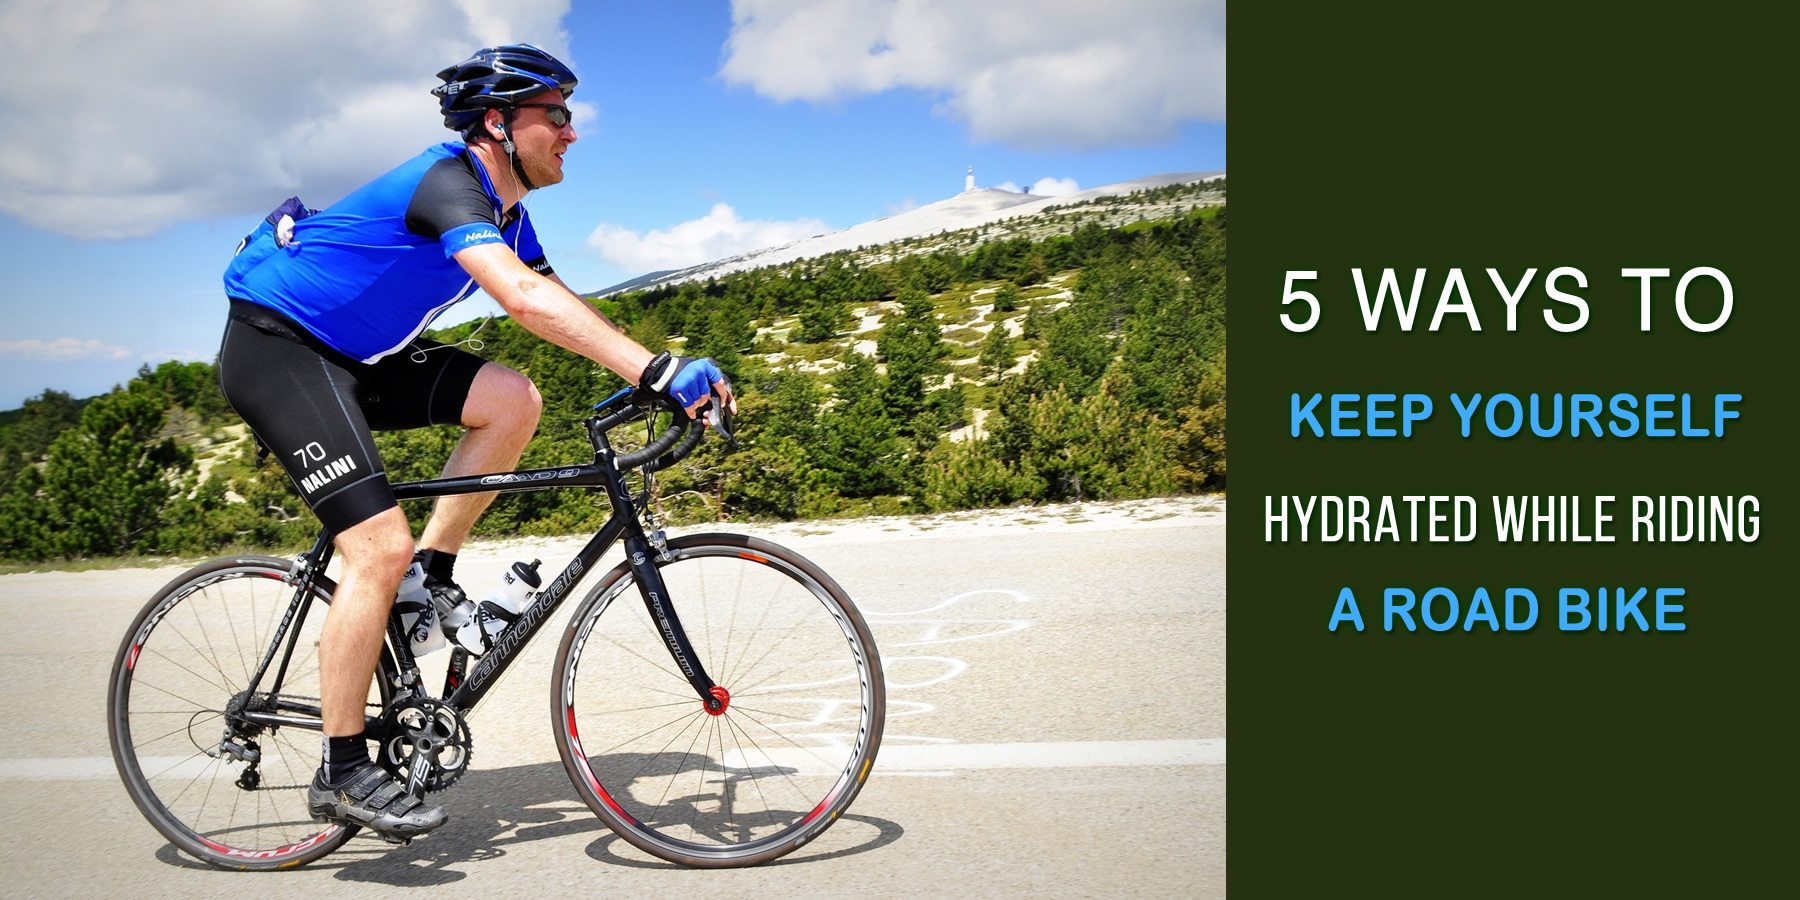 5 Ways to Keep Yourself Hydrated While Riding A Road Bike